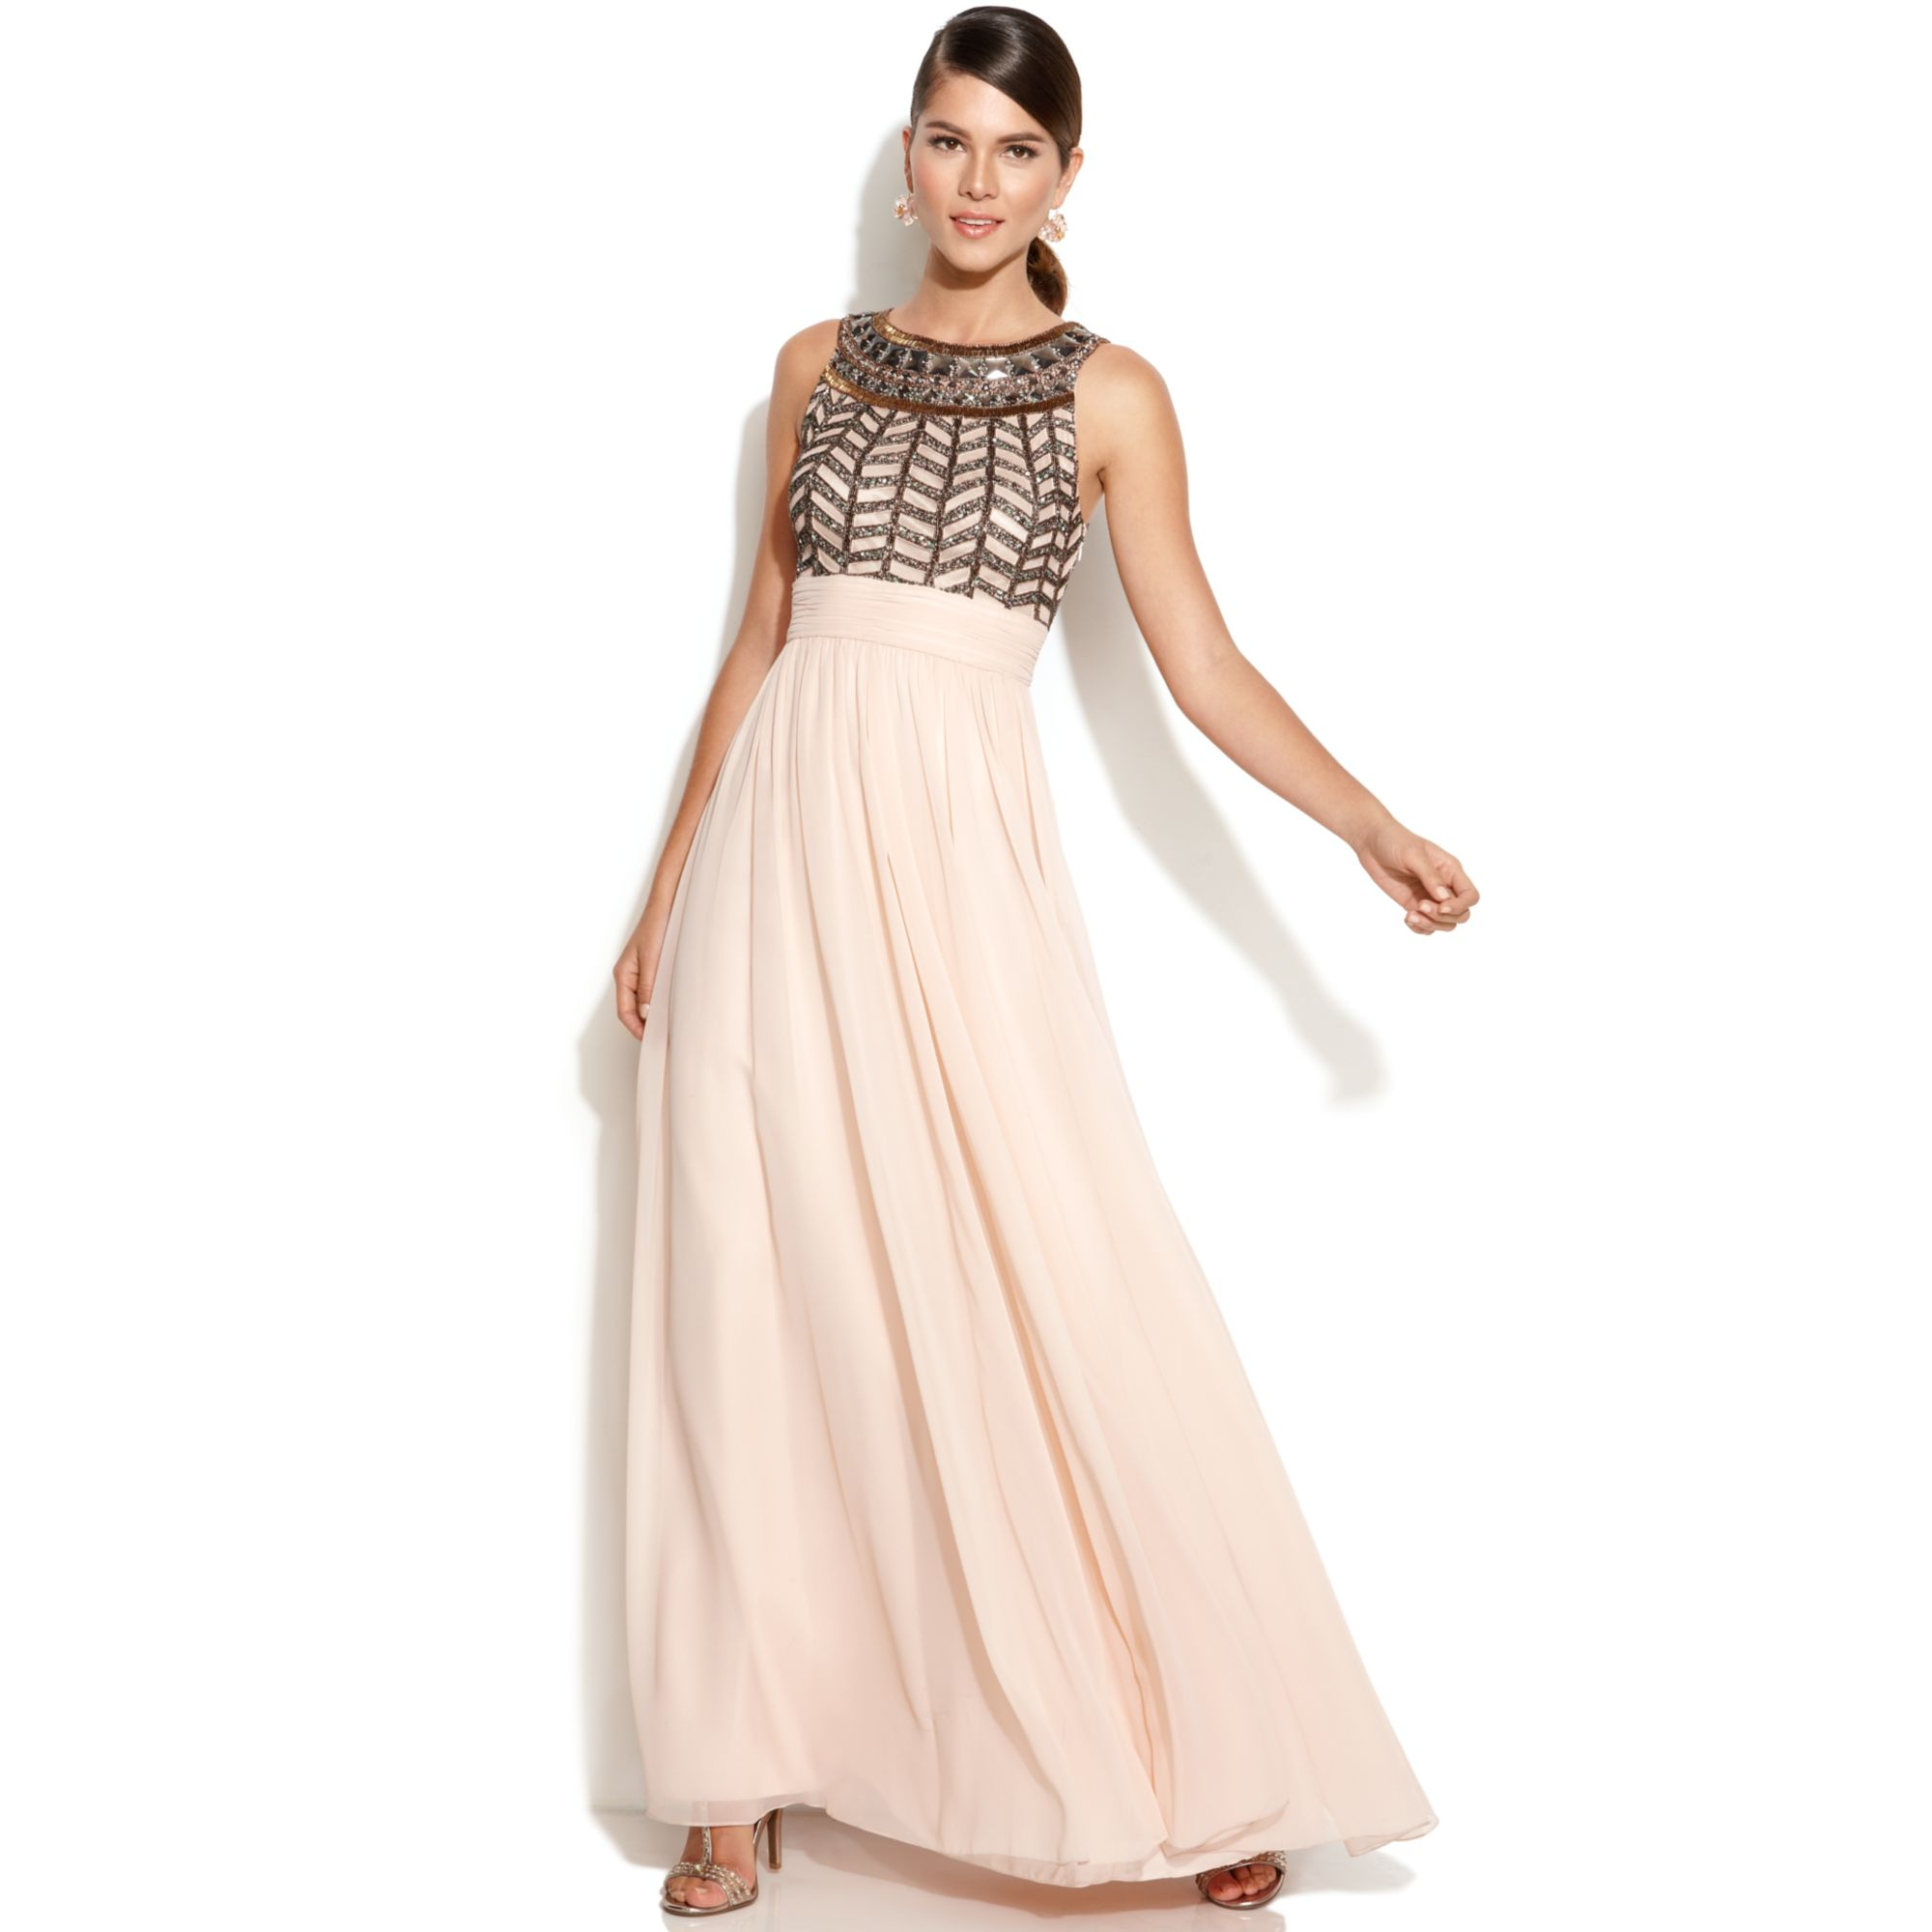 Lyst - Js Collections Sleeveless Beaded Empirewaist Gown in Pink